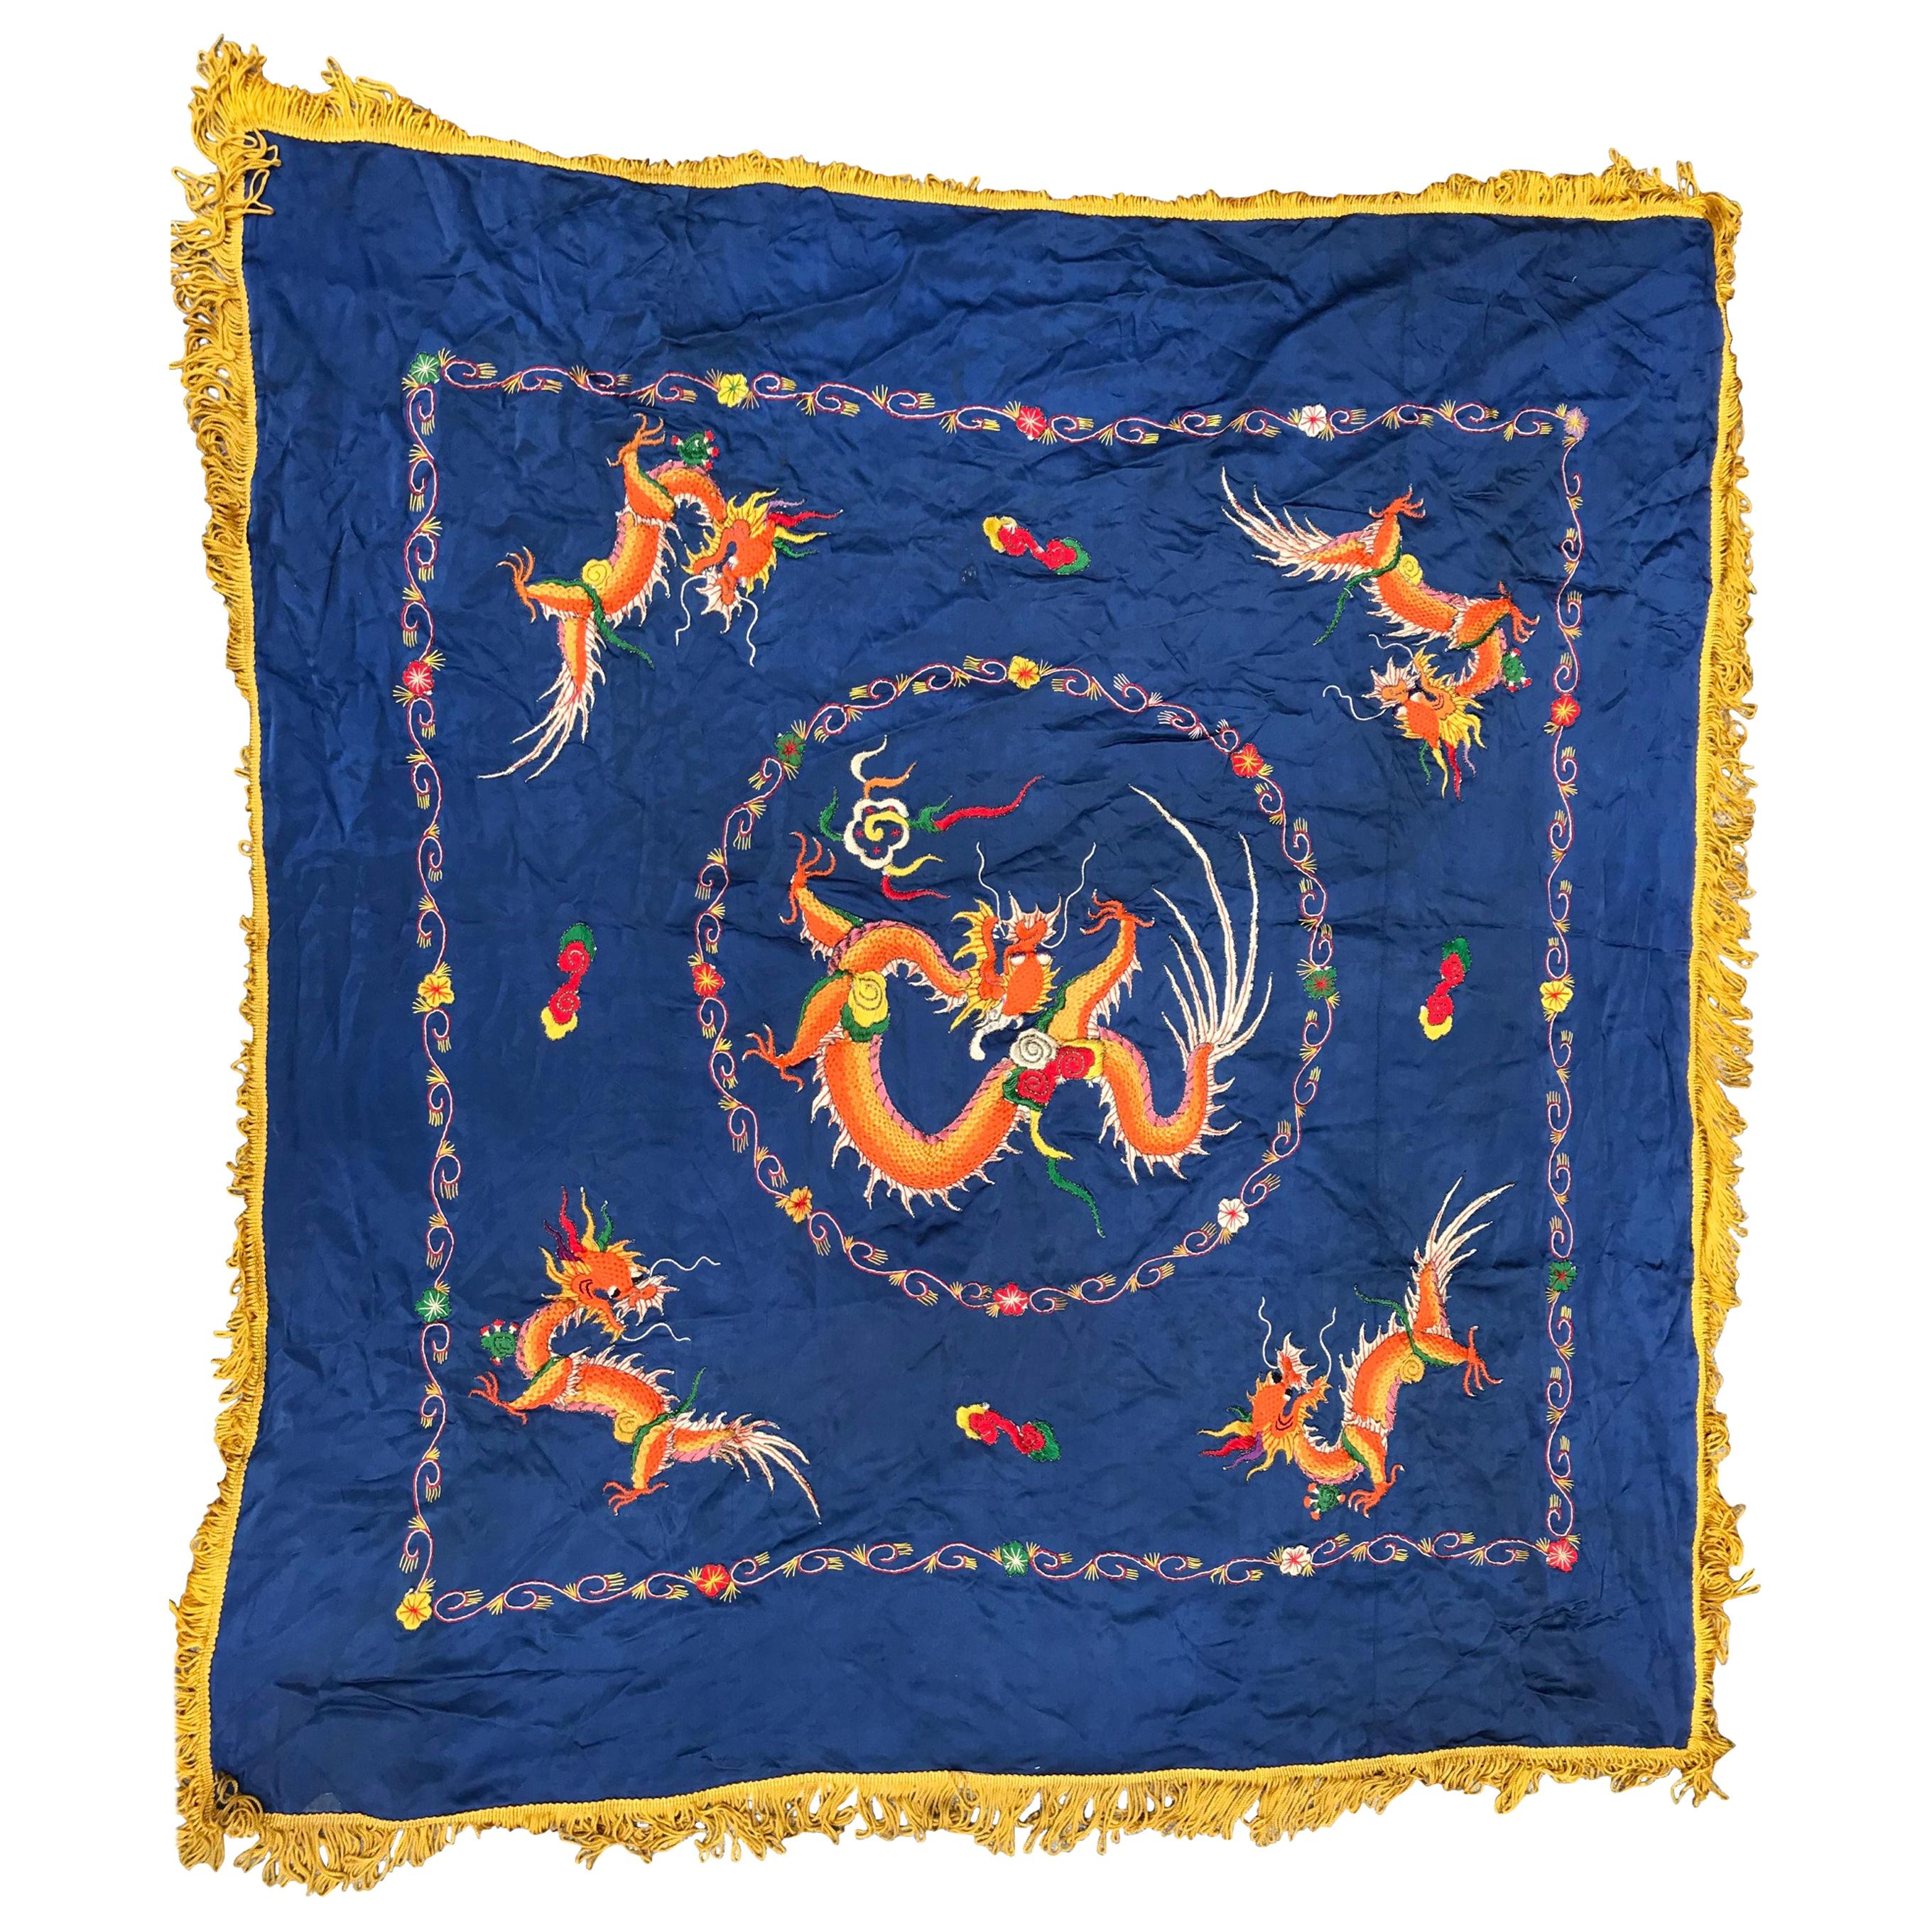 Beautiful Vintage Asian Dragon Embroidery